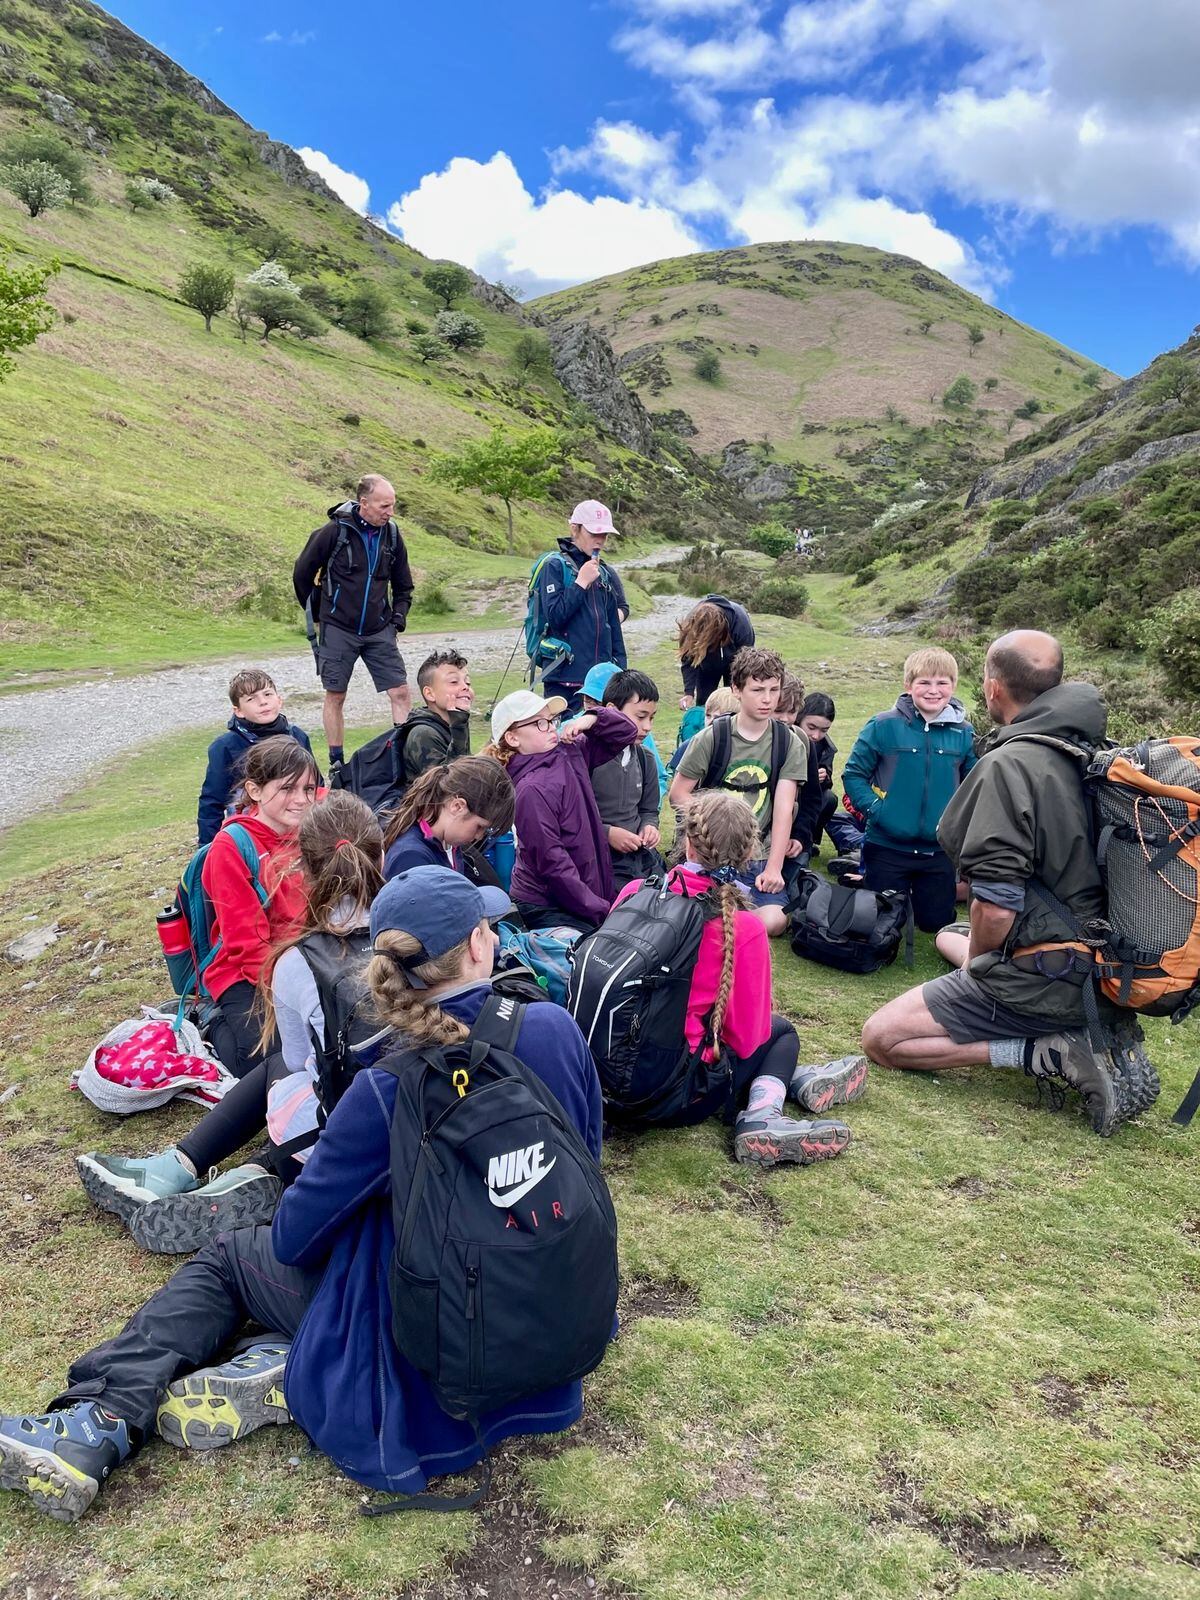 Pupils and staff from Brockton Primary School have been taking on a major walking challenge for charity